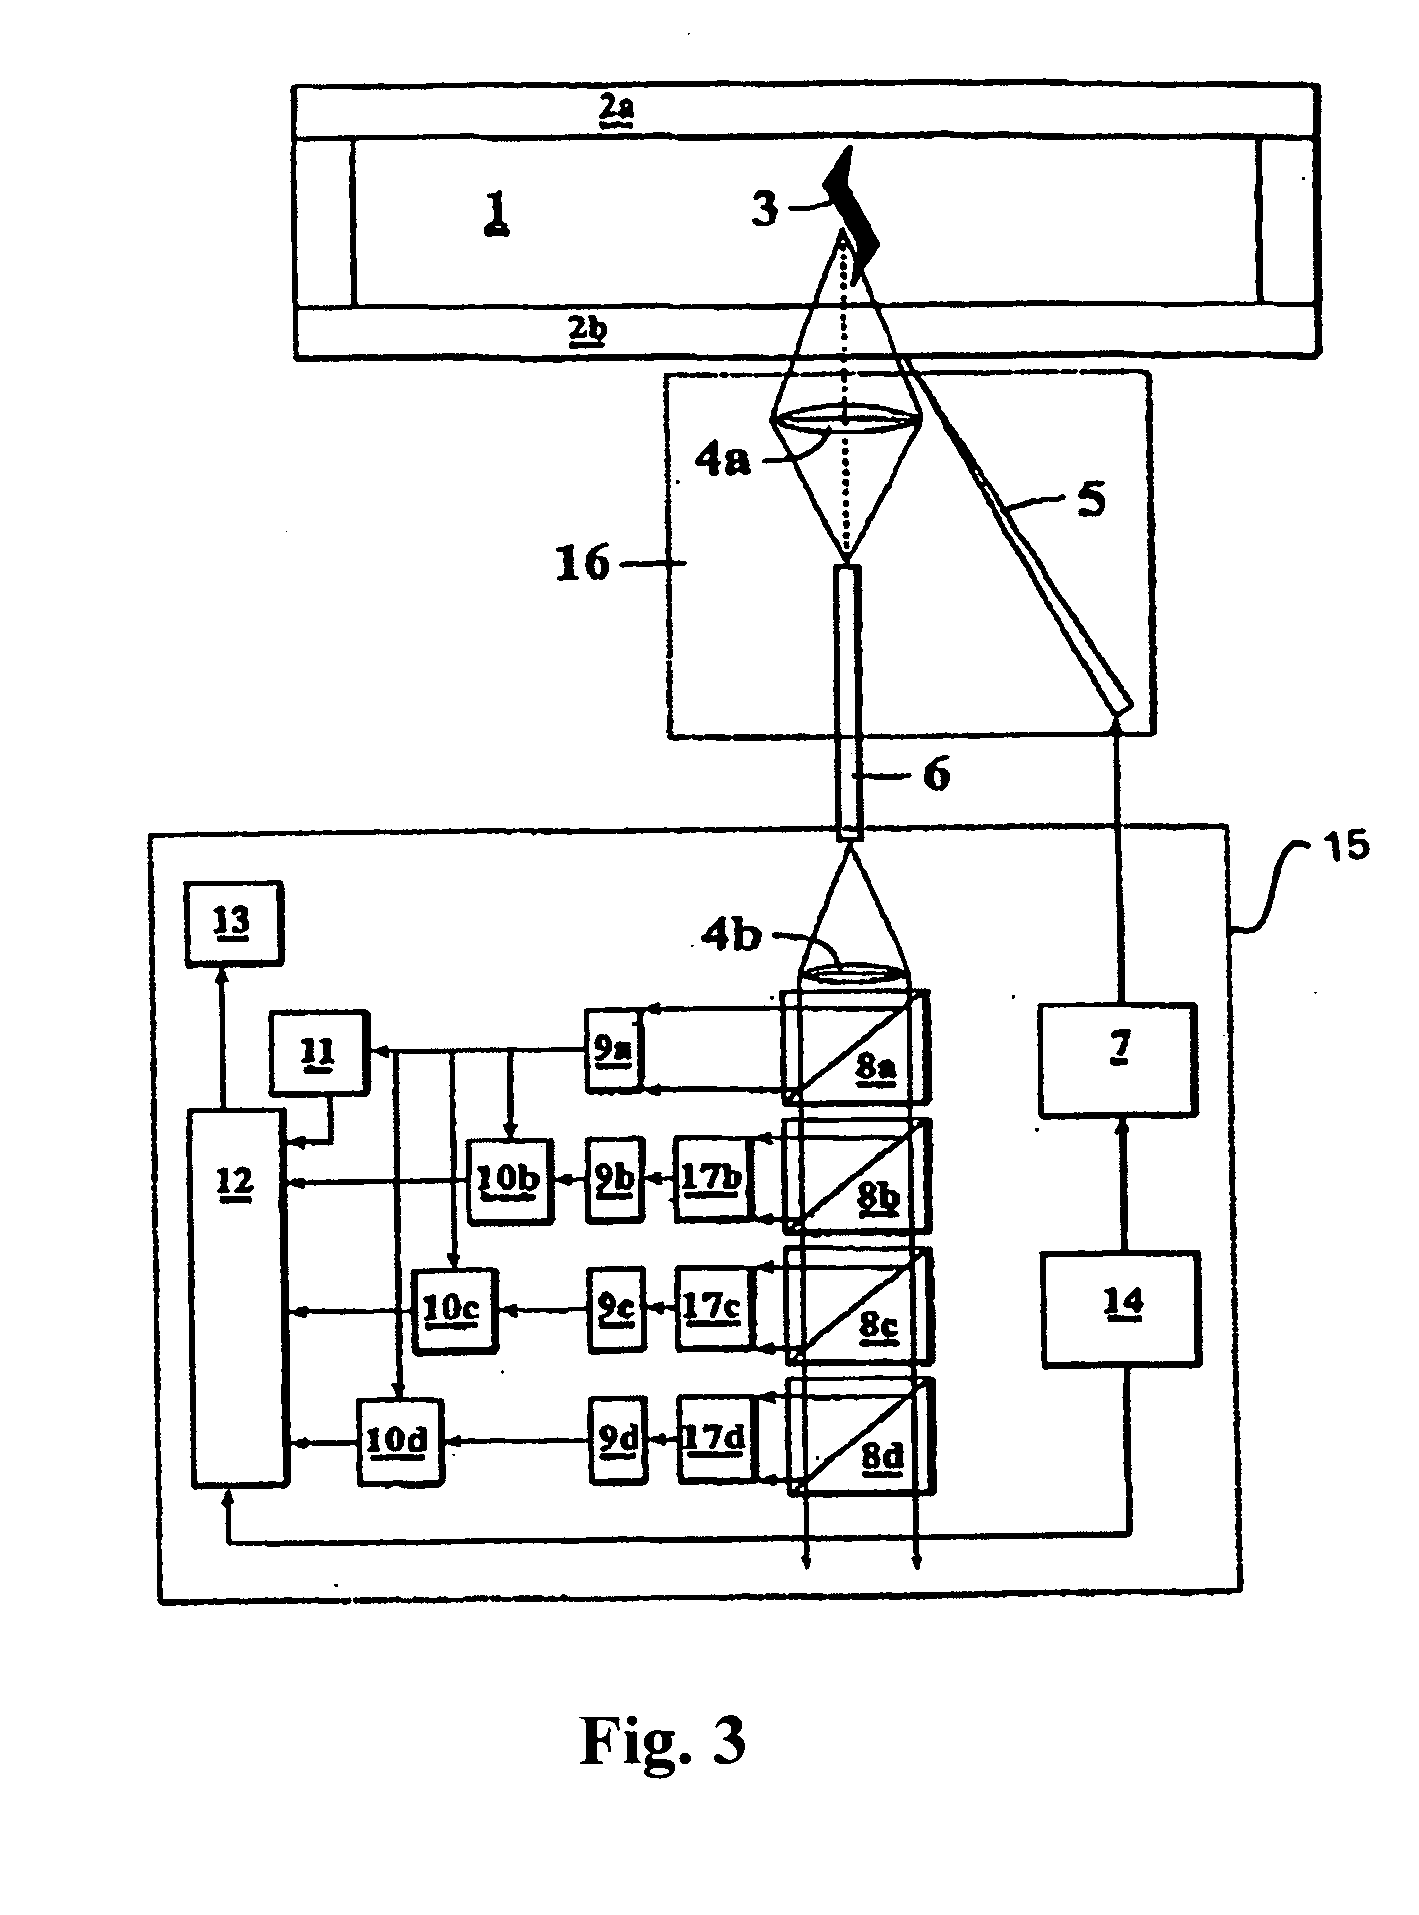 Apparatus for non-invasive analysis of gas compositions in insulated glass panes